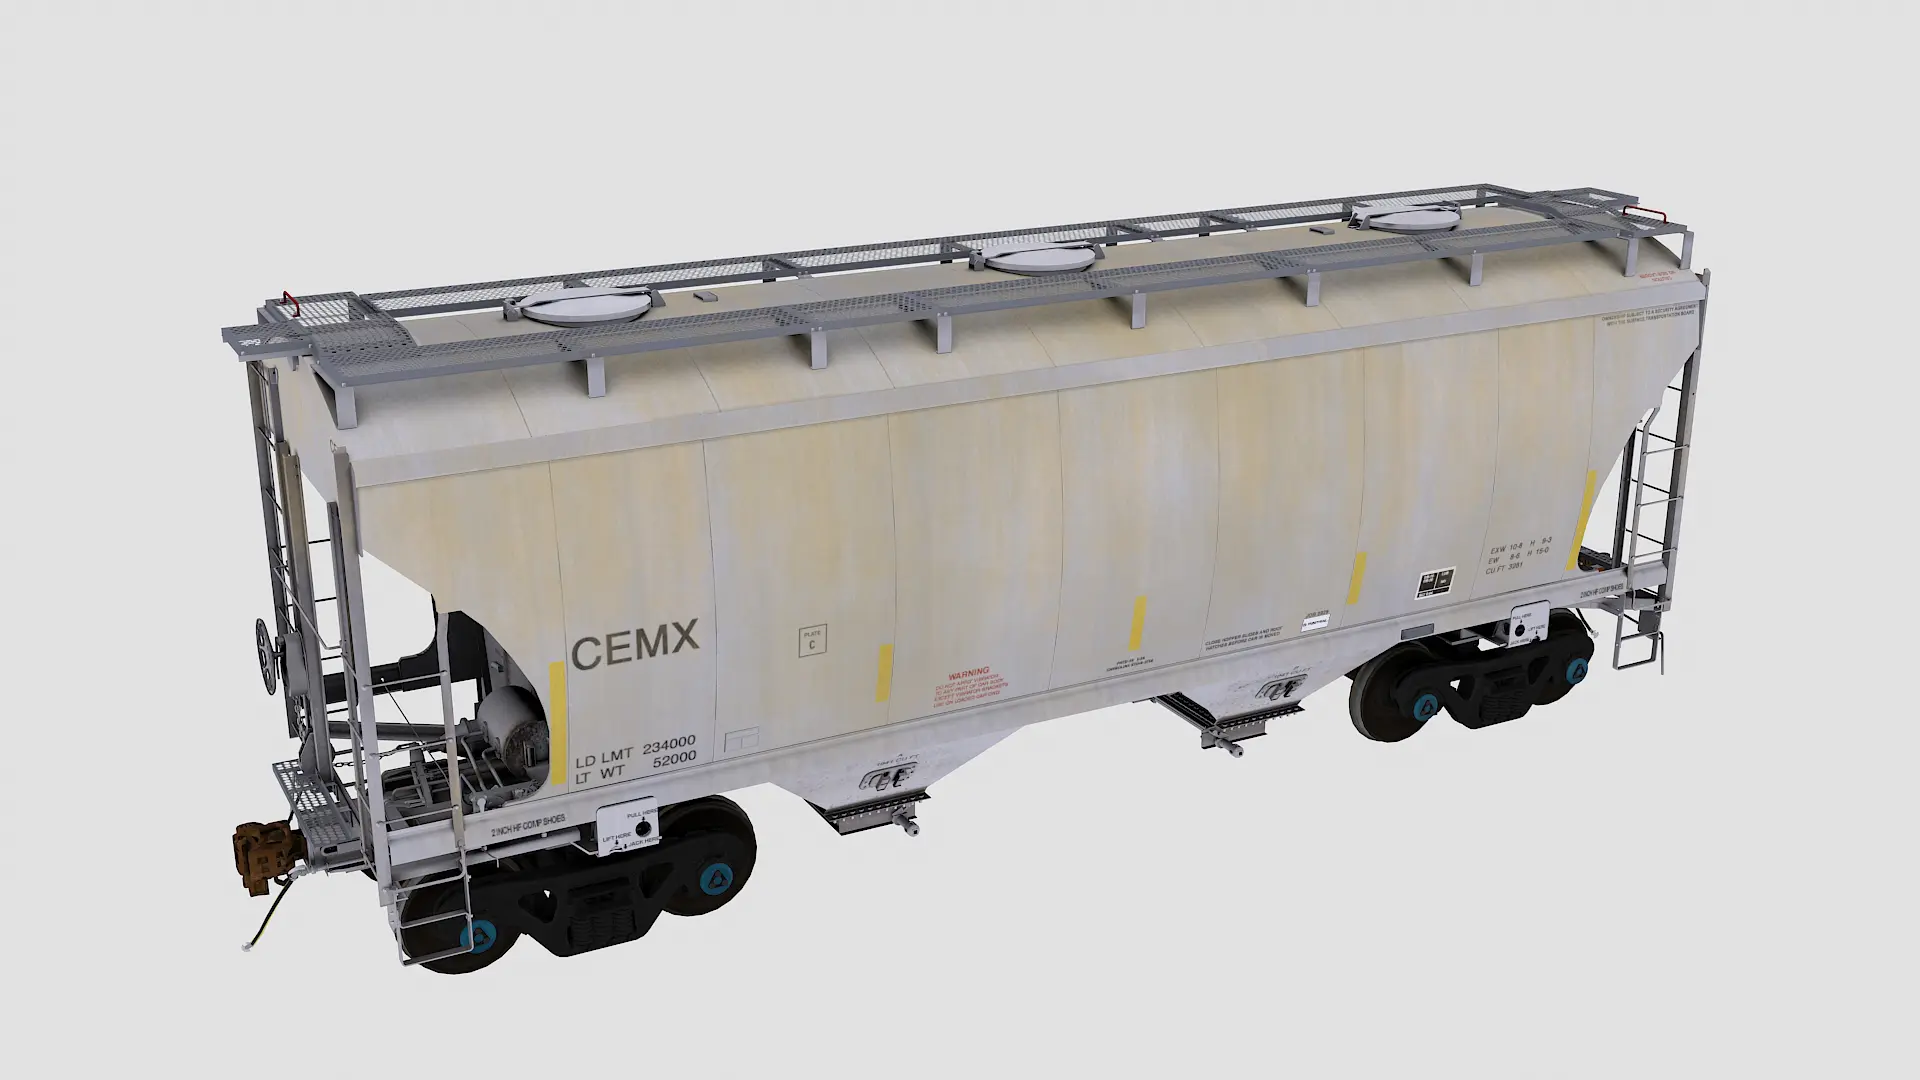 Cemx two bay covered hopper